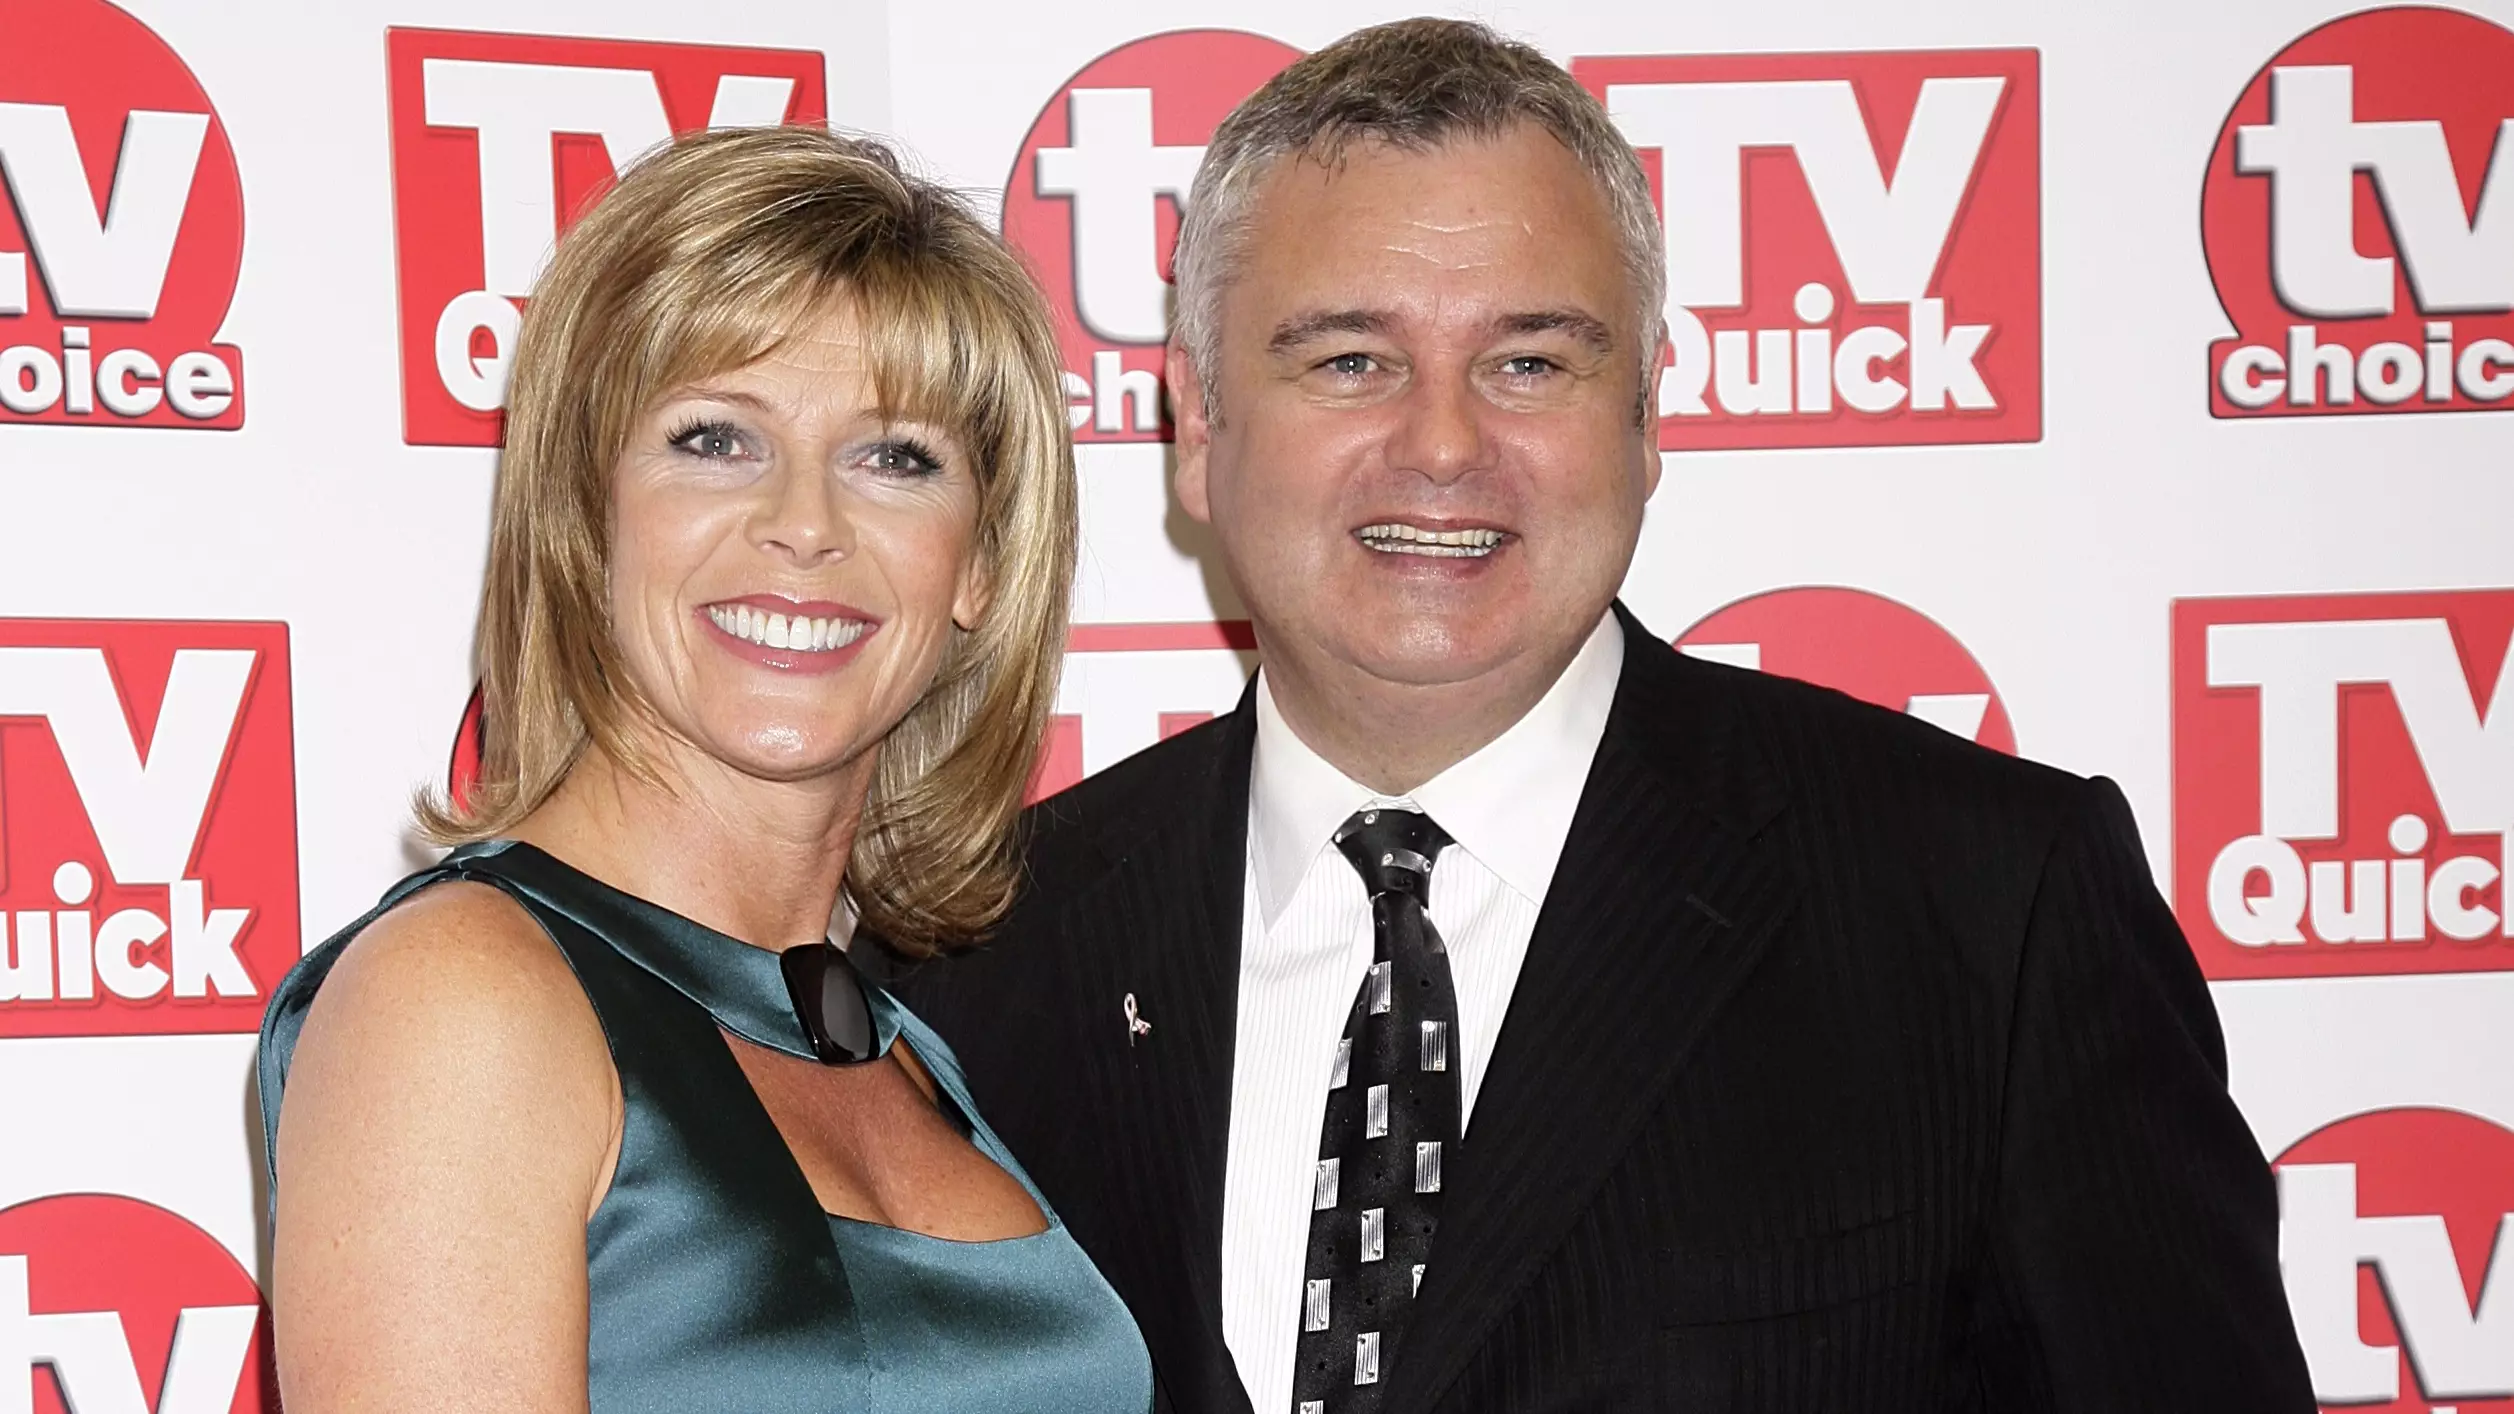 'This Morning' Host Ruth Langsford Accidentally Shared Photos Saved On Phone